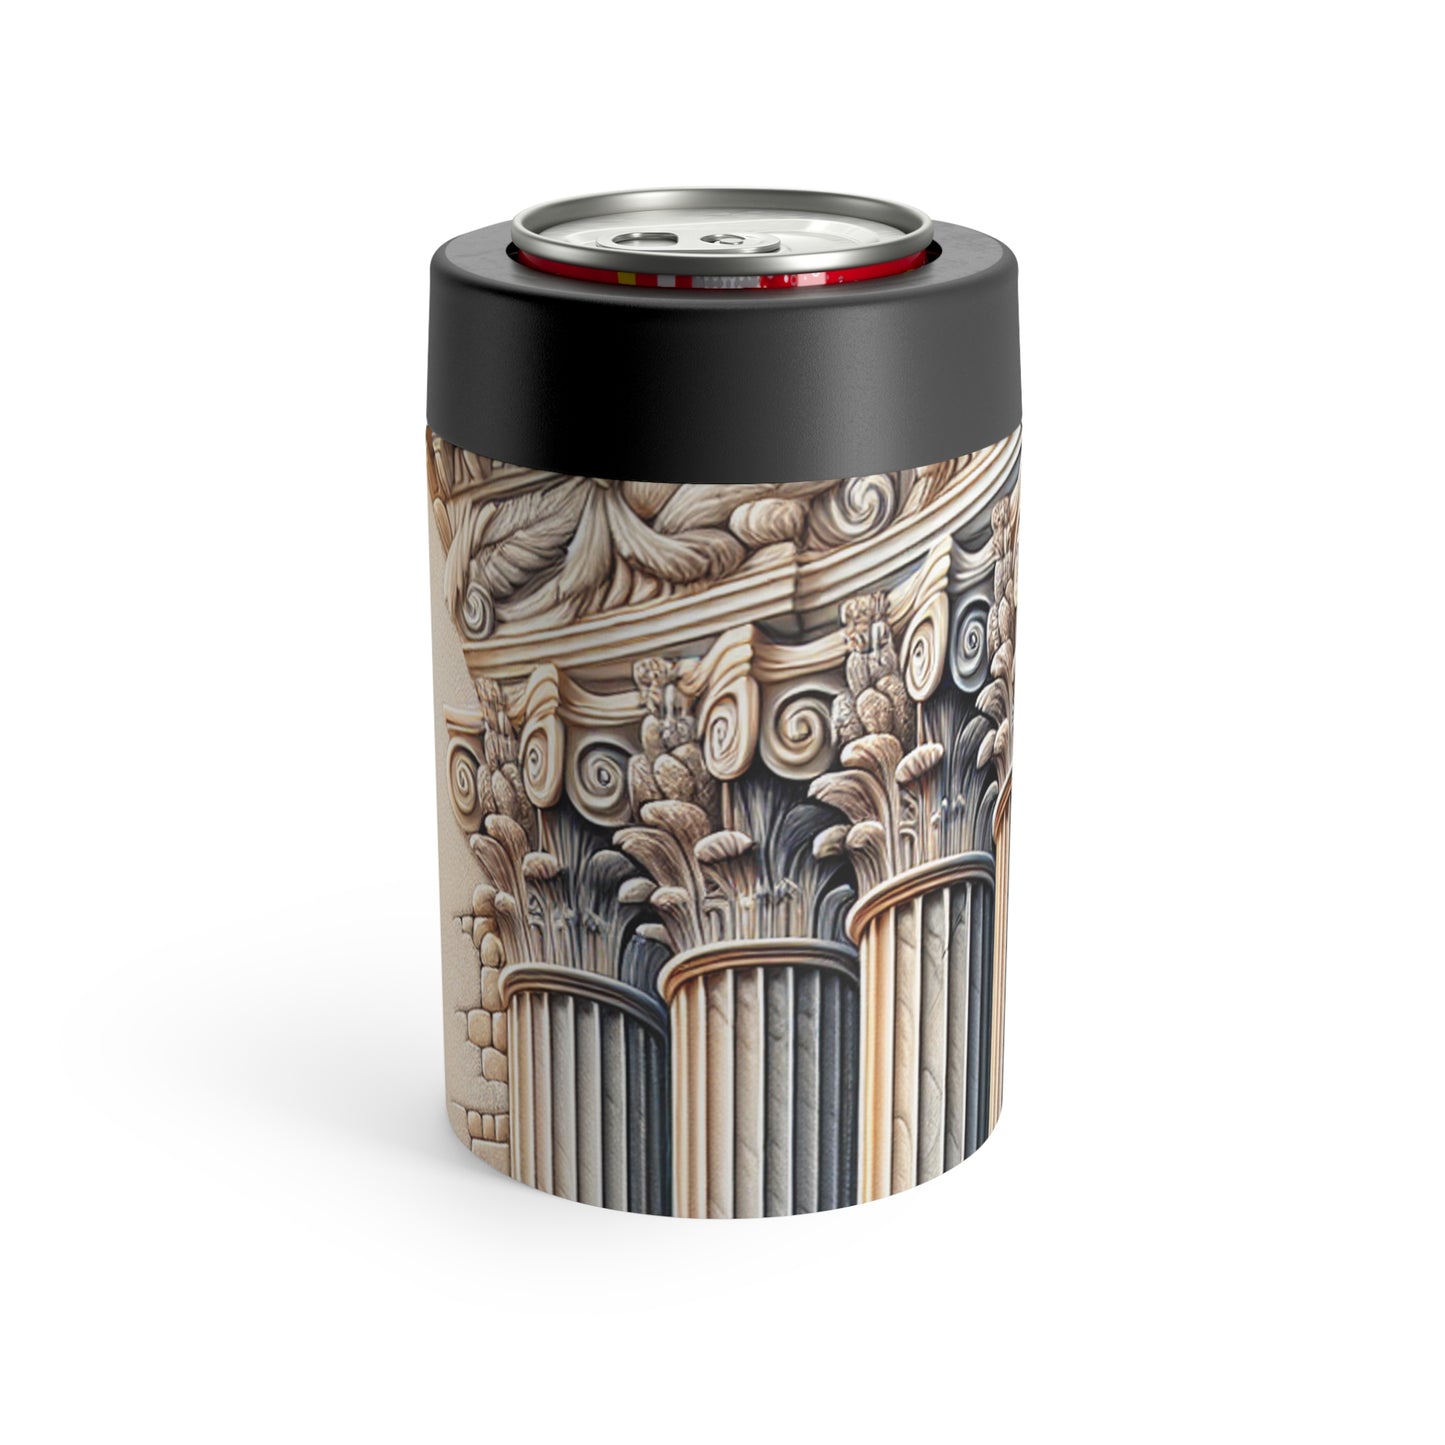 "3D Wall Columns: An Architectural Artpiece" - The Alien Can Holder Trompe-l'oeil Style